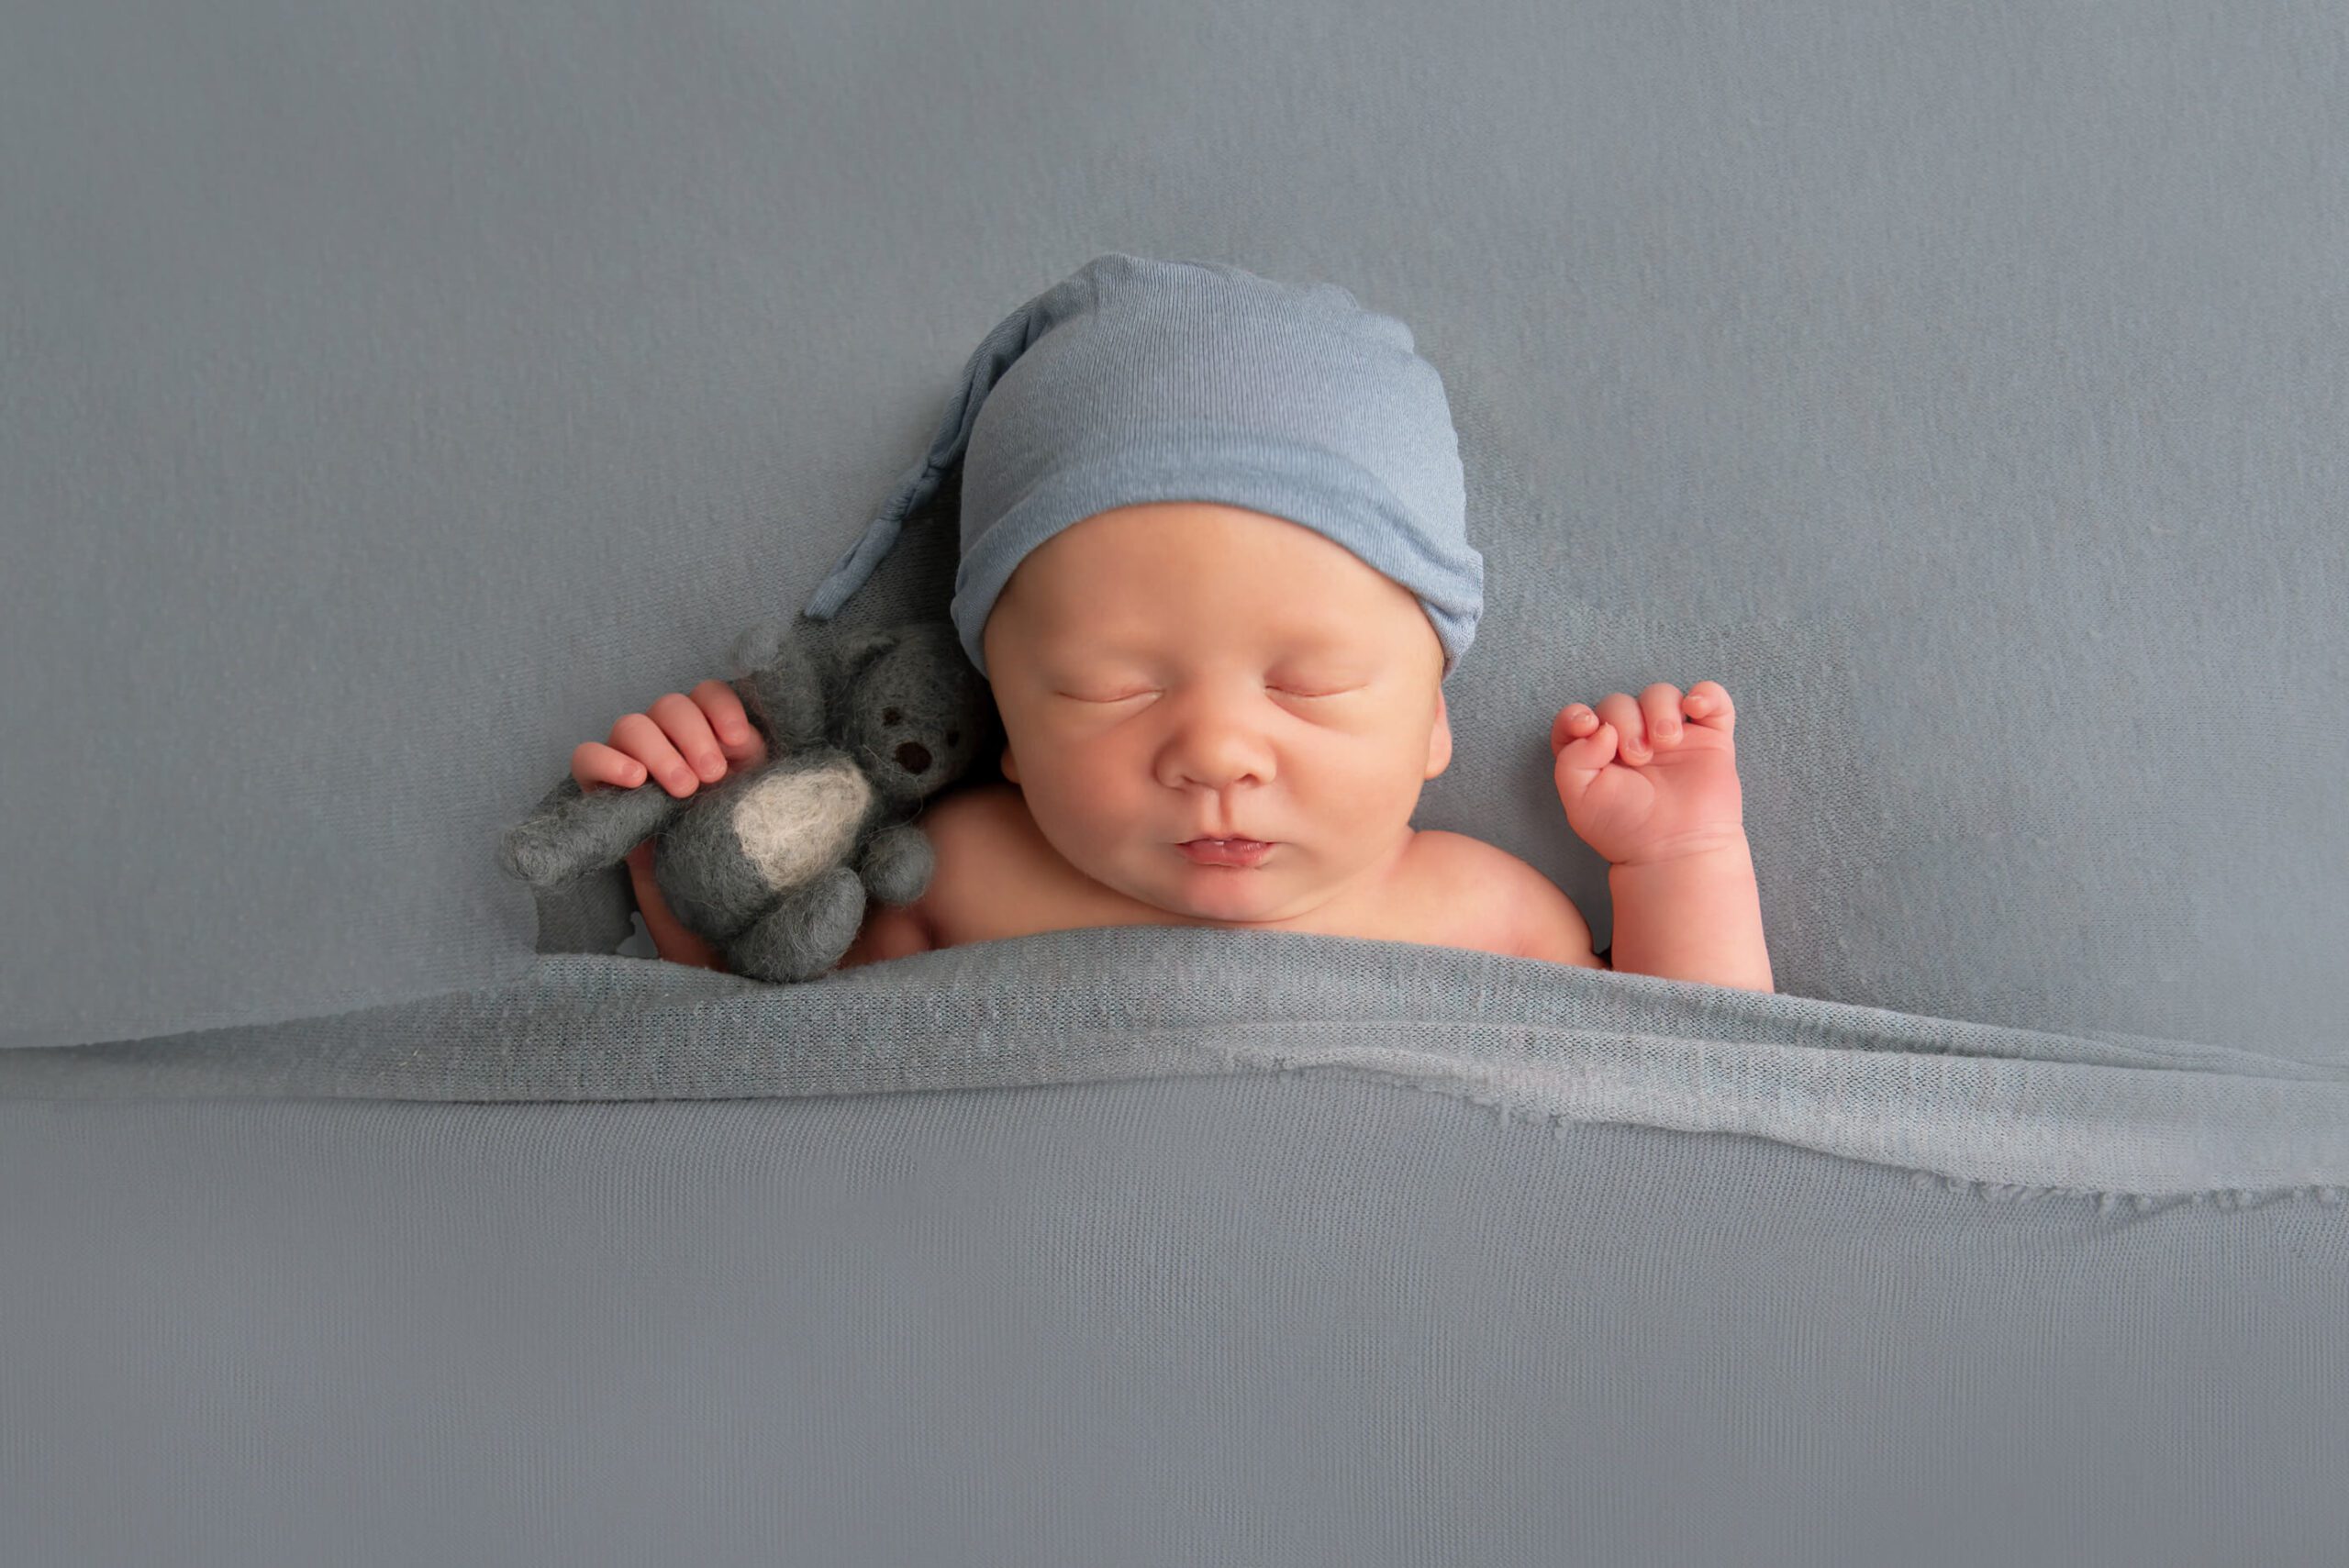 newborn photos of a boy laying with a sleepy hat and bear in hand